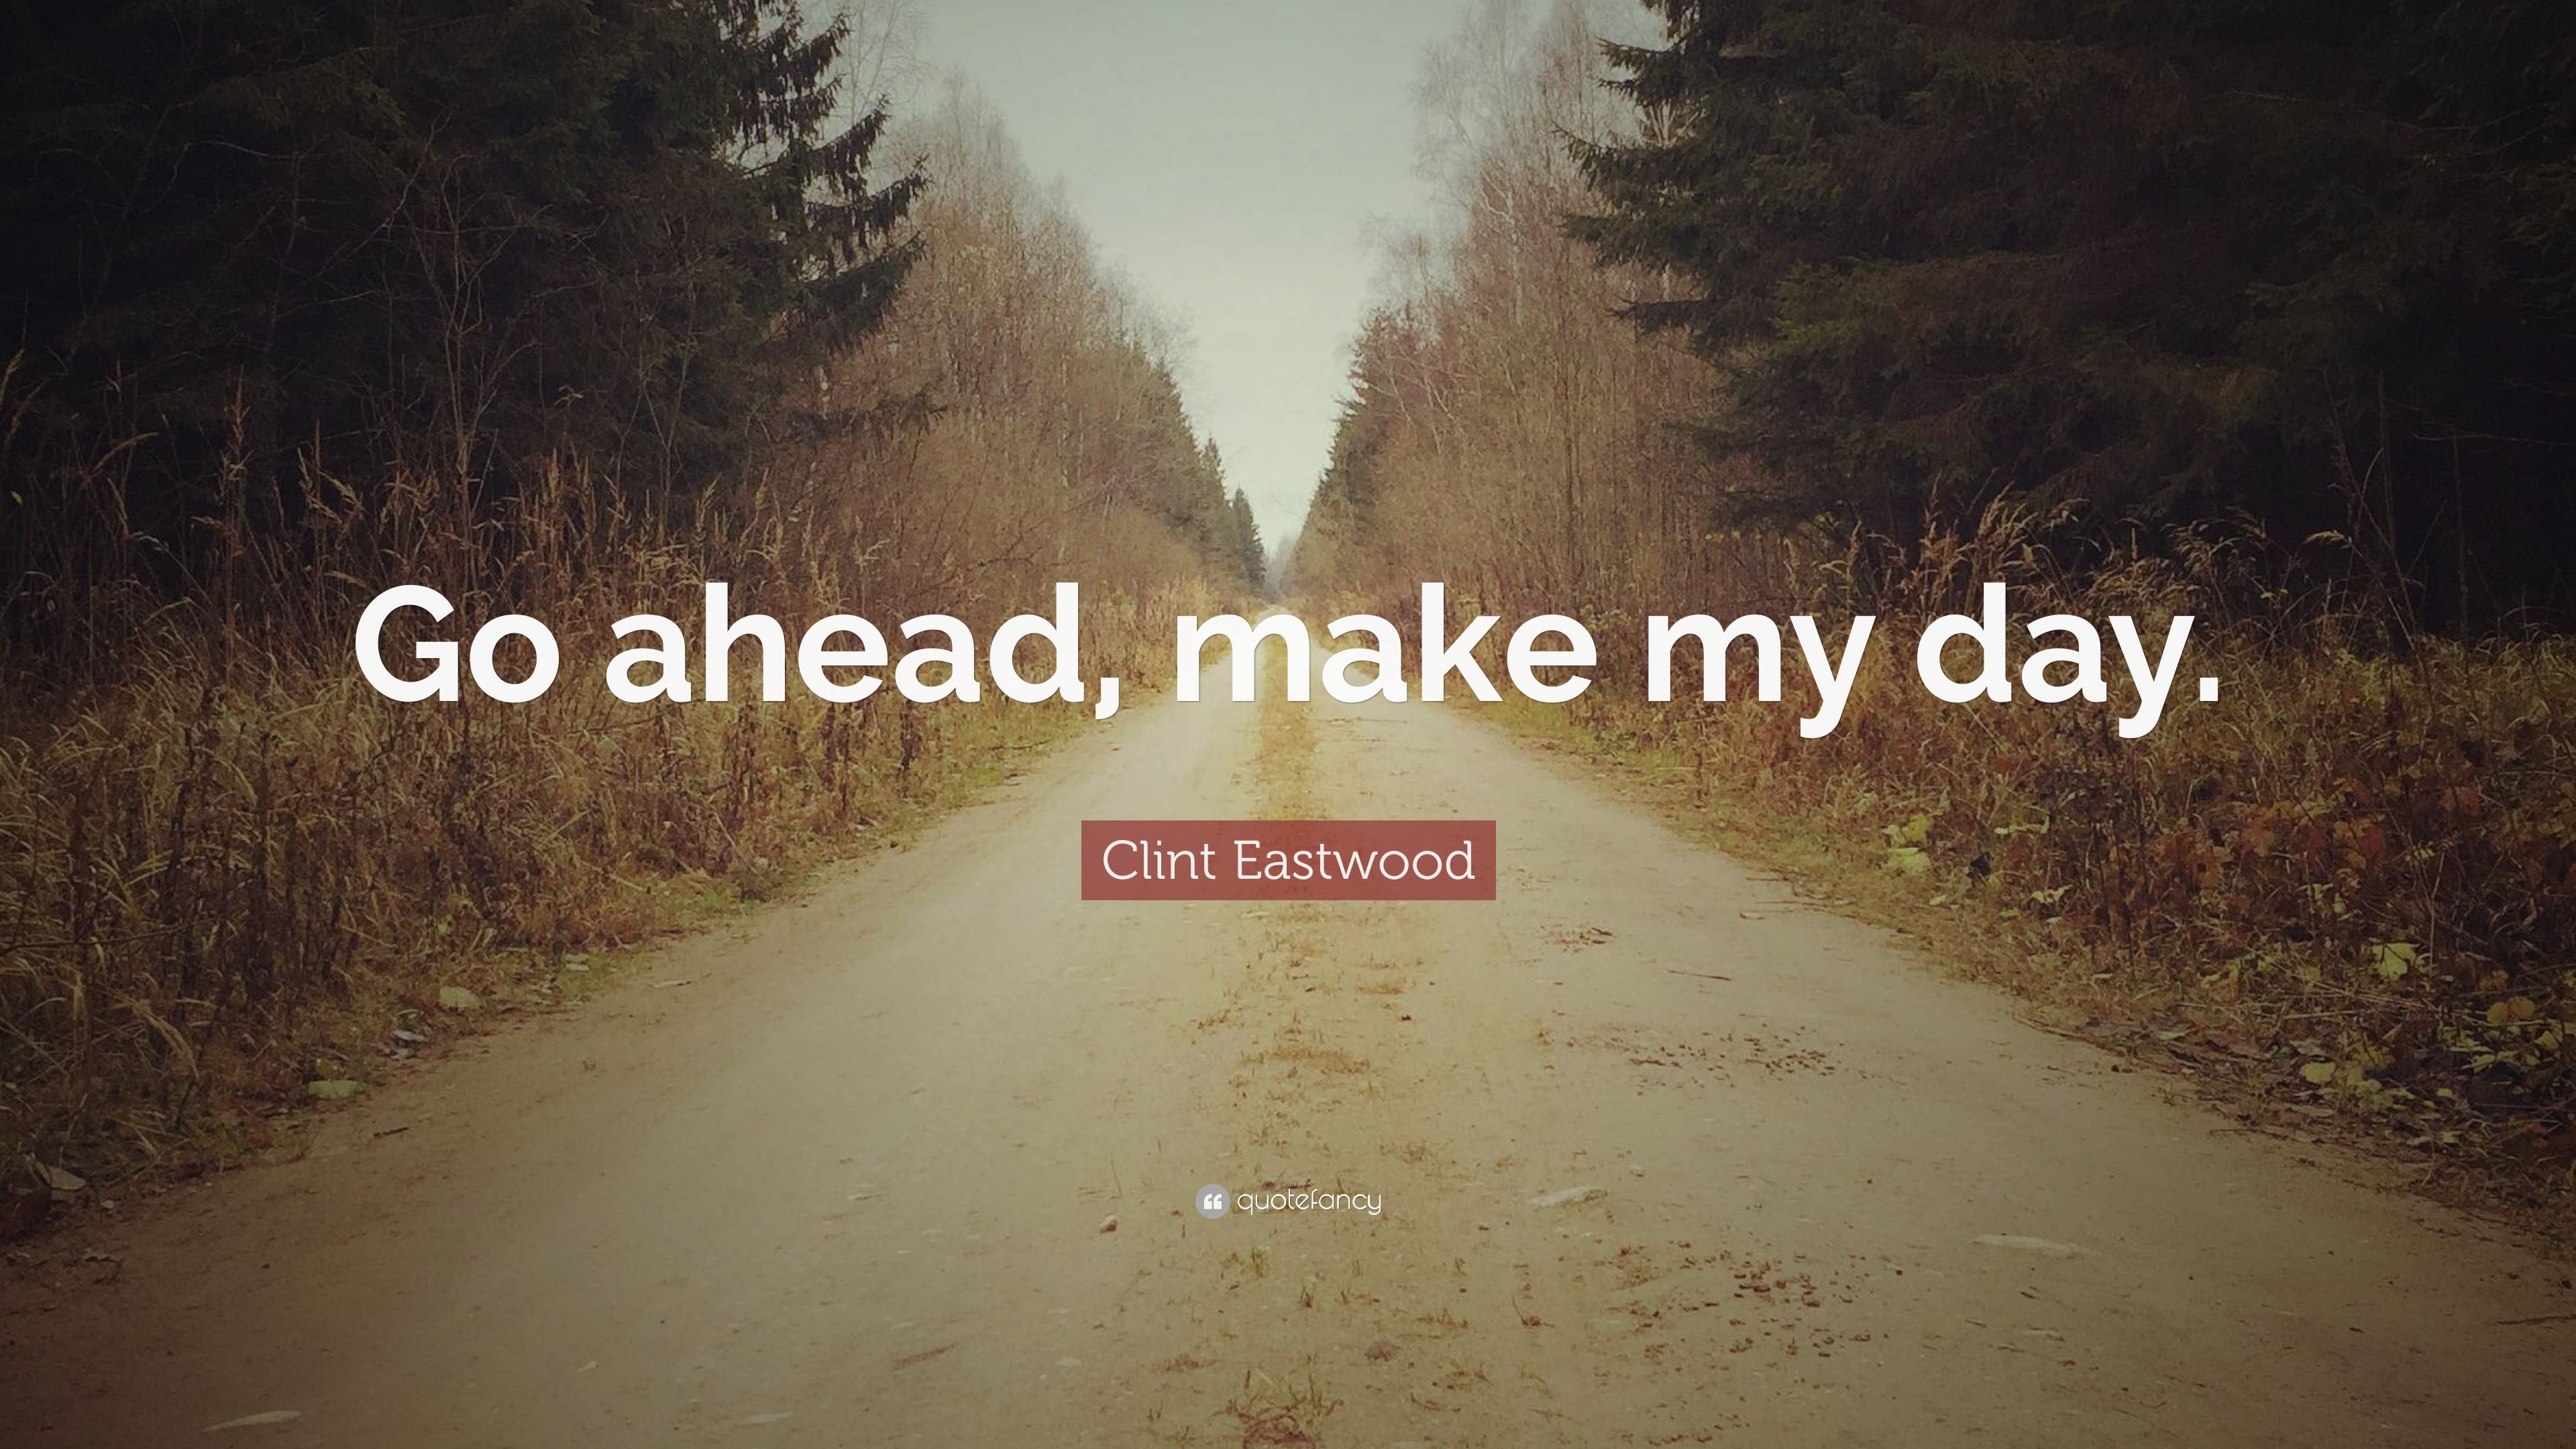 Clint Eastwood Quote: “Go ahead, make my day.” (12 wallpaper)